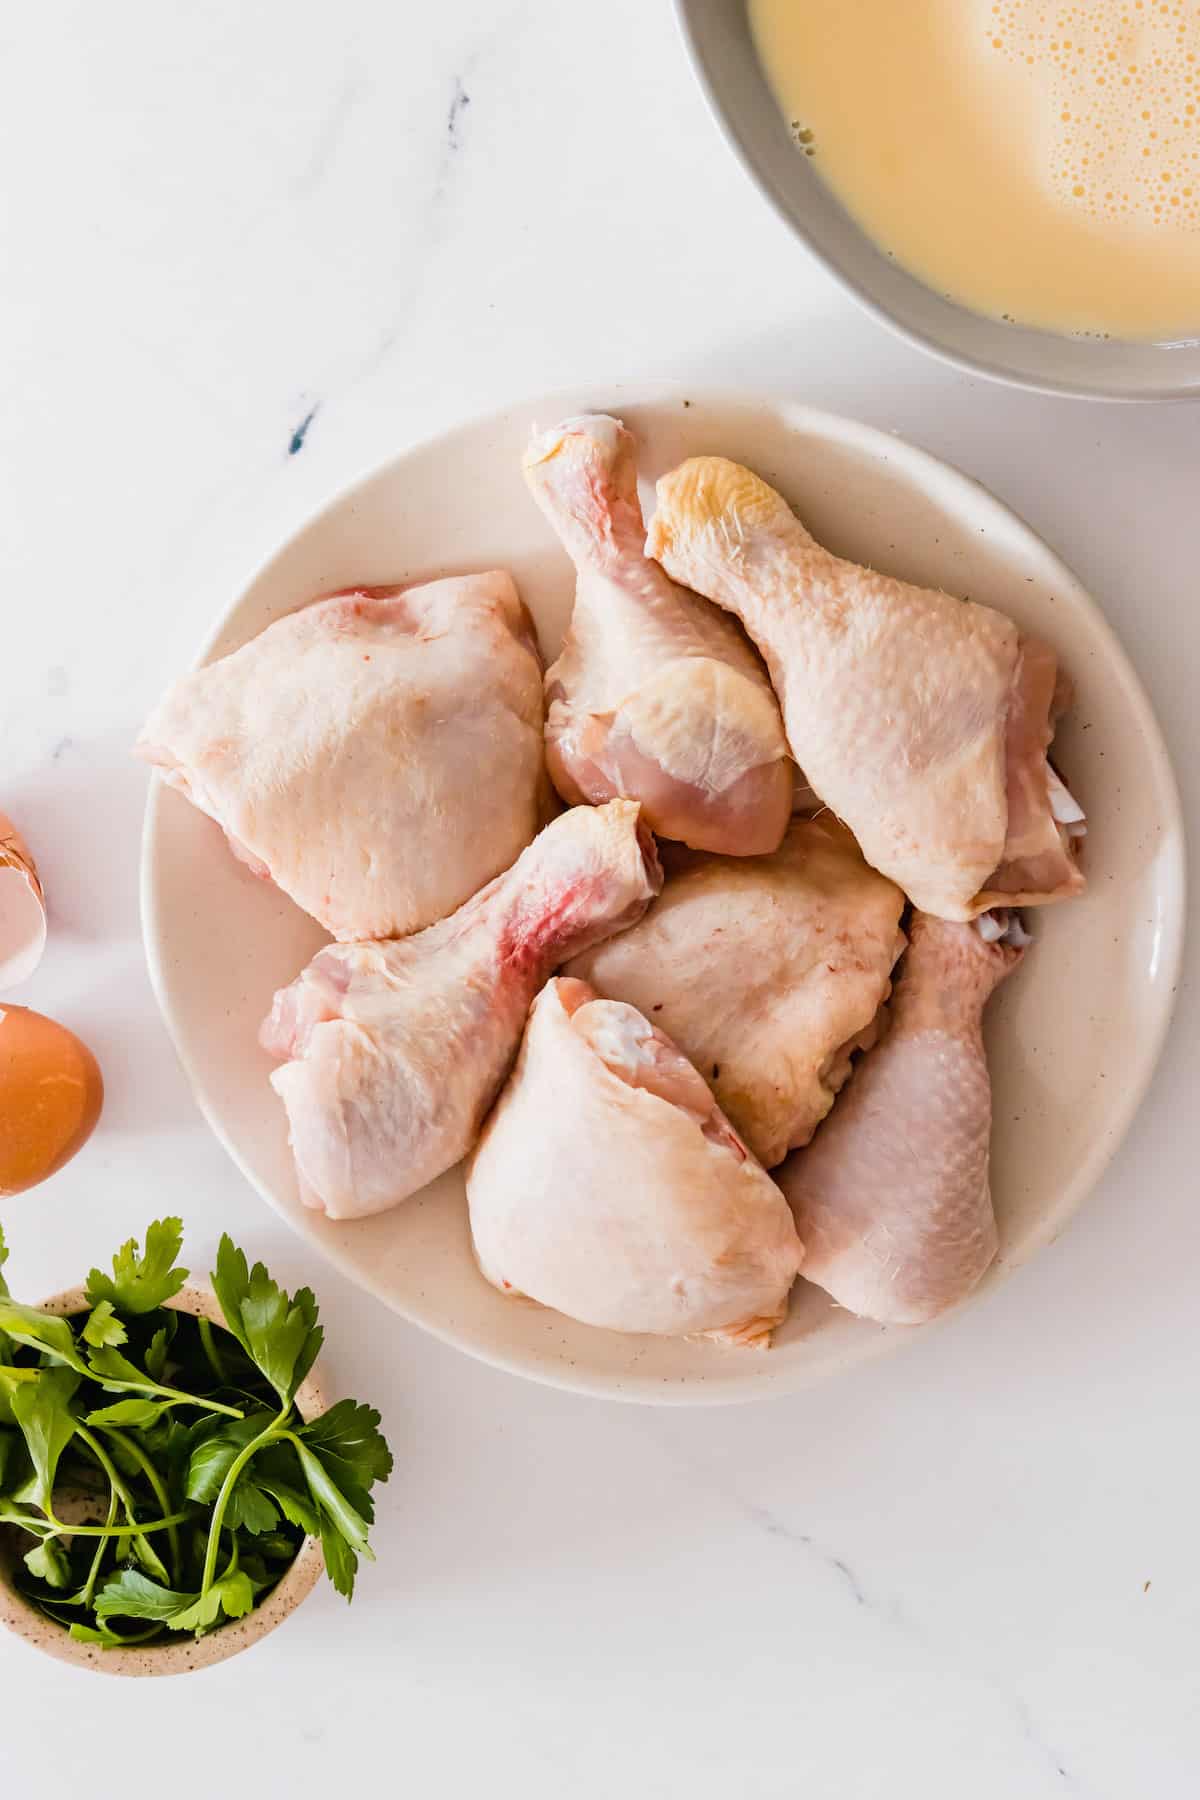 Seven Pieces of Raw, Skin-On Chicken on a White Plate